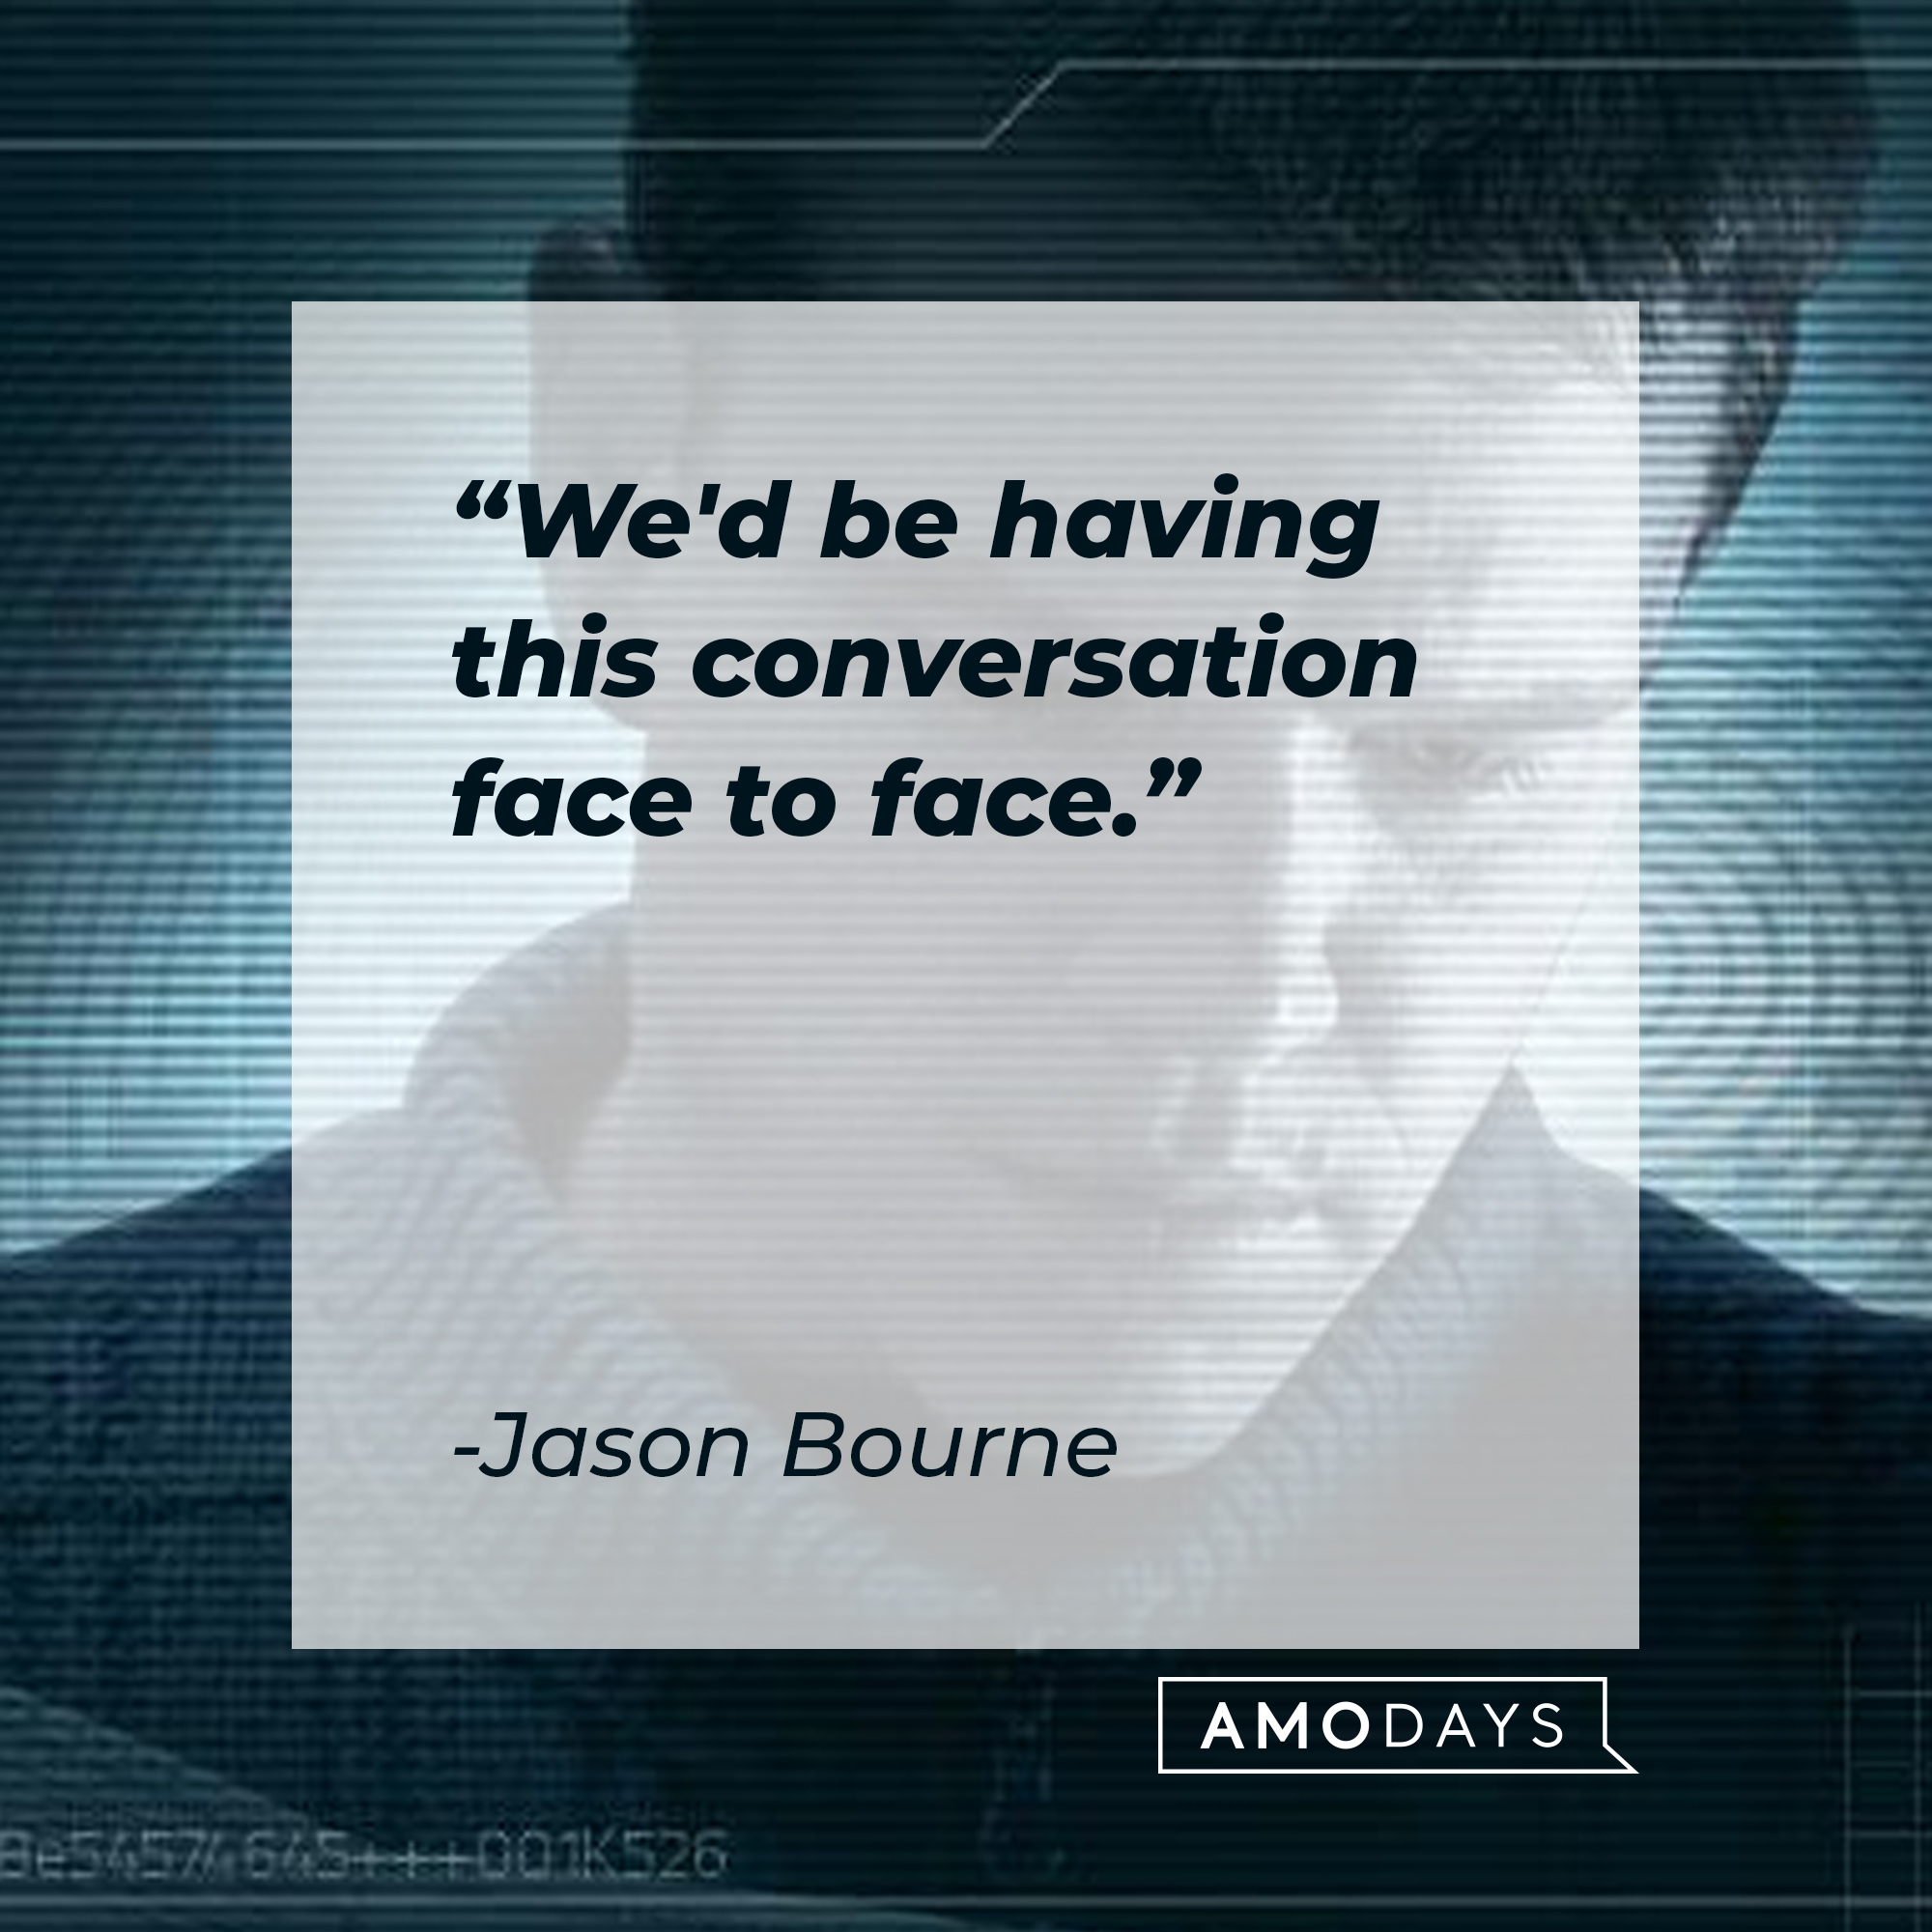 Jason Bourne's quote: "We'd be having this conversation face to face." | Source: facebook.com/TheBourneSeries